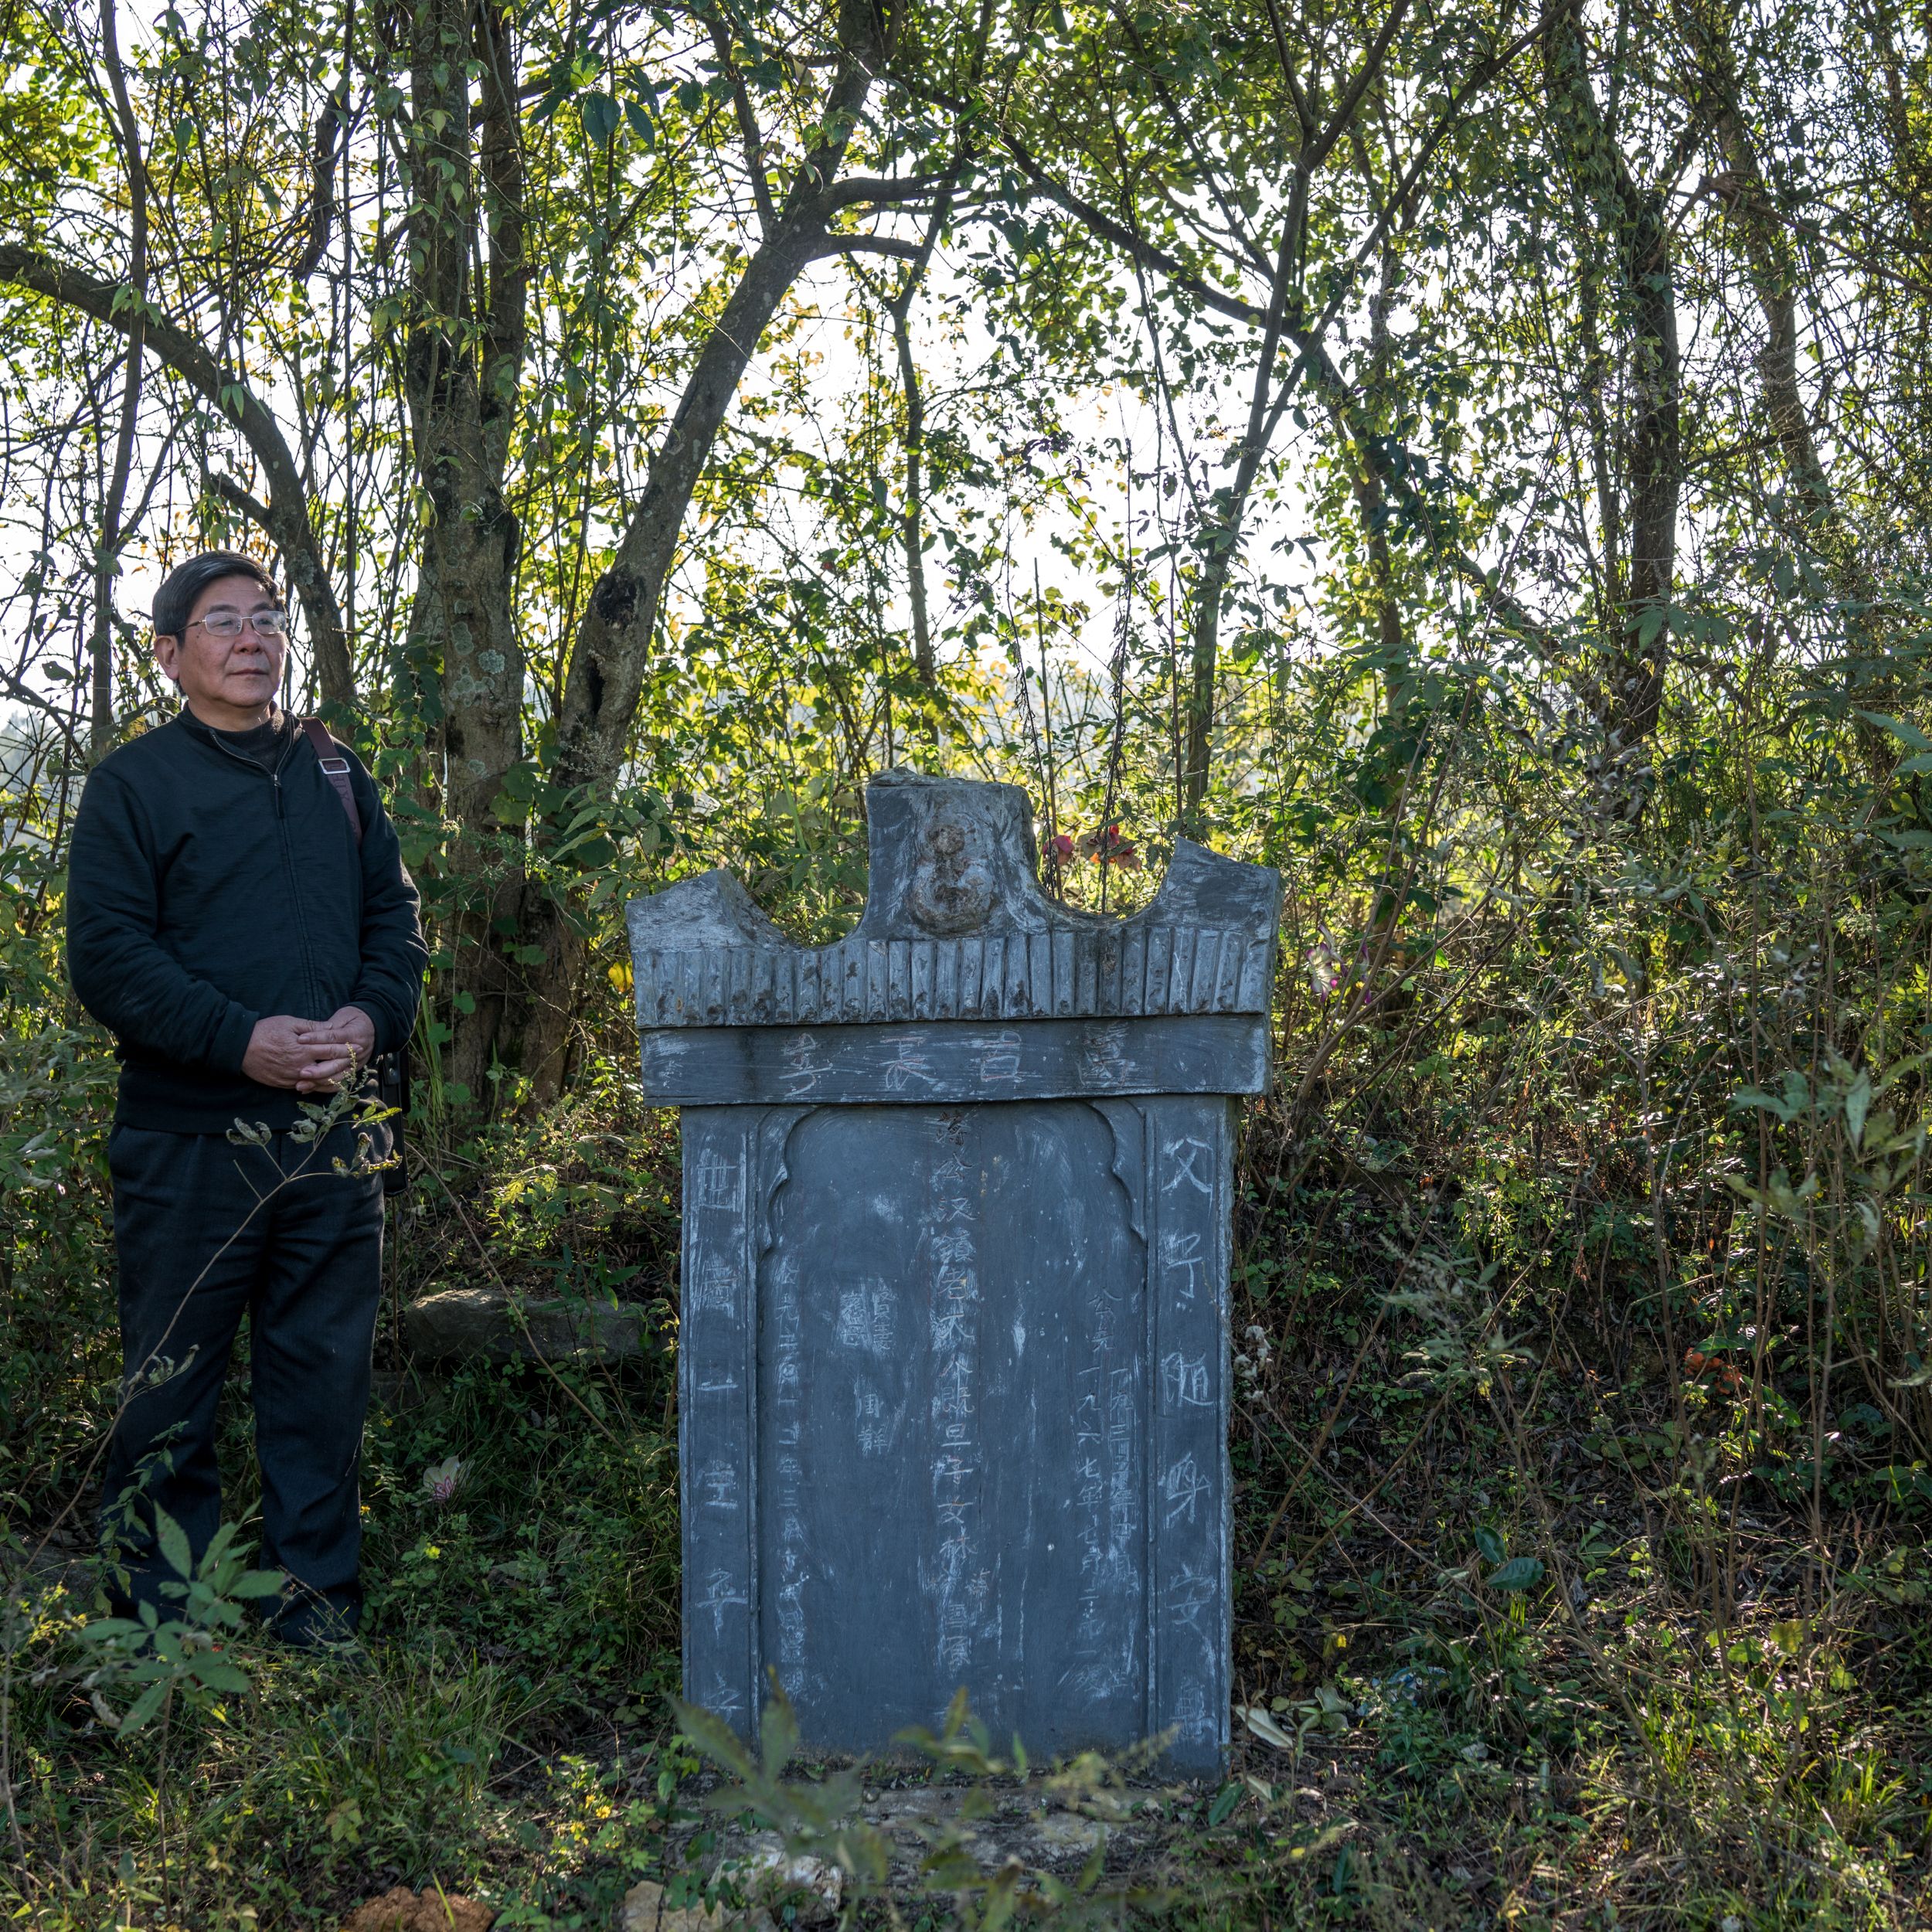 Tan Hecheng at a tombstone put up by Zhou Qun for her husband and three children, who were among the thousands of people killed during the Cultural Revolution in Dao County. Image by Sim Chi Yin. China/VII, 2016.